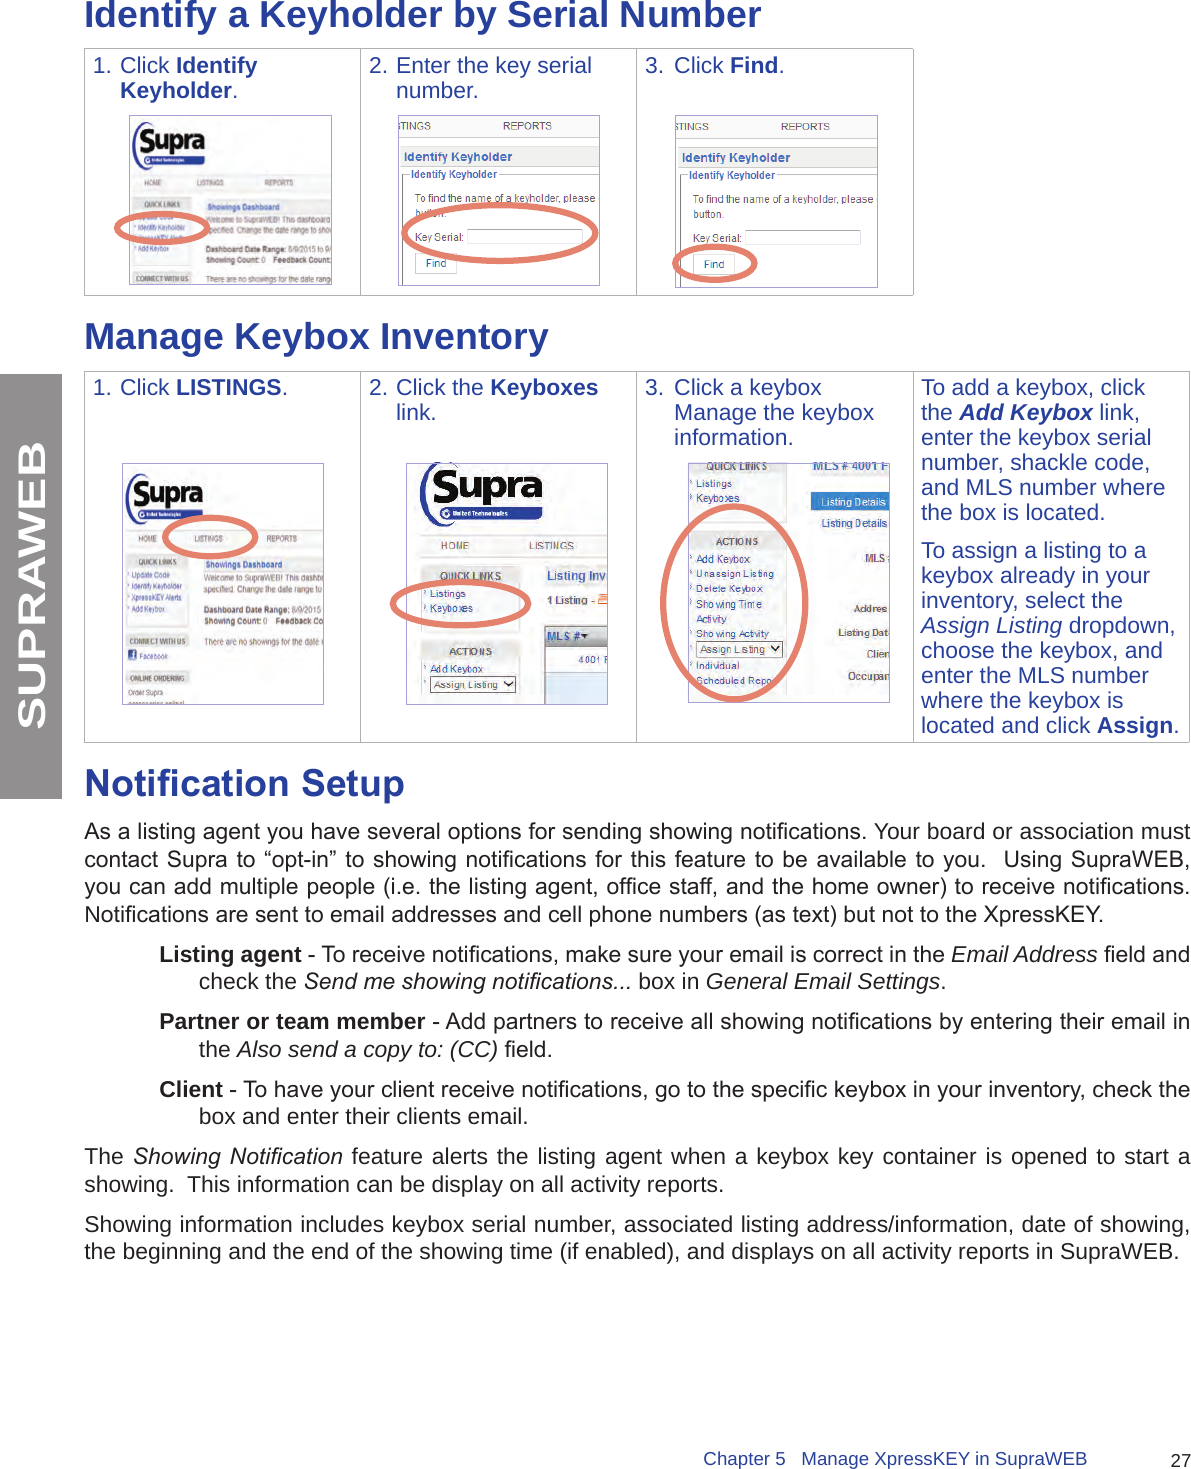 27Chapter 5   Manage XpressKEY in SupraWEBSUPRAWEBIdentify a Keyholder by Serial Number1. Click Identify Keyholder.2. Enter the key serial number. 3.  Click Find.Manage Keybox Inventory1. Click LISTINGS. 2. Click the Keyboxes link. 3.  Click a keybox Manage the keybox information.To add a keybox, click the Add Keybox link, enter the keybox serial number, shackle code, and MLS number where the box is located.To assign a listing to a keybox already in your inventory, select the Assign Listing dropdown, choose the keybox, and enter the MLS number where the keybox is located and click Assign.Notication SetupAs a listing agent you have several options for sending showing notications. Your board or association must contact Supra to “opt-in” to showing notications for this feature to  be available to you.  Using SupraWEB, you can add multiple people (i.e. the listing agent, ofce staff, and the home owner) to receive notications.  Notications are sent to email addresses and cell phone numbers (as text) but not to the XpressKEY. Listing agent - To receive notications, make sure your email is correct in the Email Address eld and check the Send me showing notications... box in General Email Settings.Partner or team member - Add partners to receive all showing notications by entering their email in the Also send a copy to: (CC) eld.Client - To have your client receive notications, go to the specic keybox in your inventory, check the box and enter their clients email.The Showing  Notication feature alerts the listing agent when a keybox key container is opened to start a showing.  This information can be display on all activity reports.  Showing information includes keybox serial number, associated listing address/information, date of showing, the beginning and the end of the showing time (if enabled), and displays on all activity reports in SupraWEB.